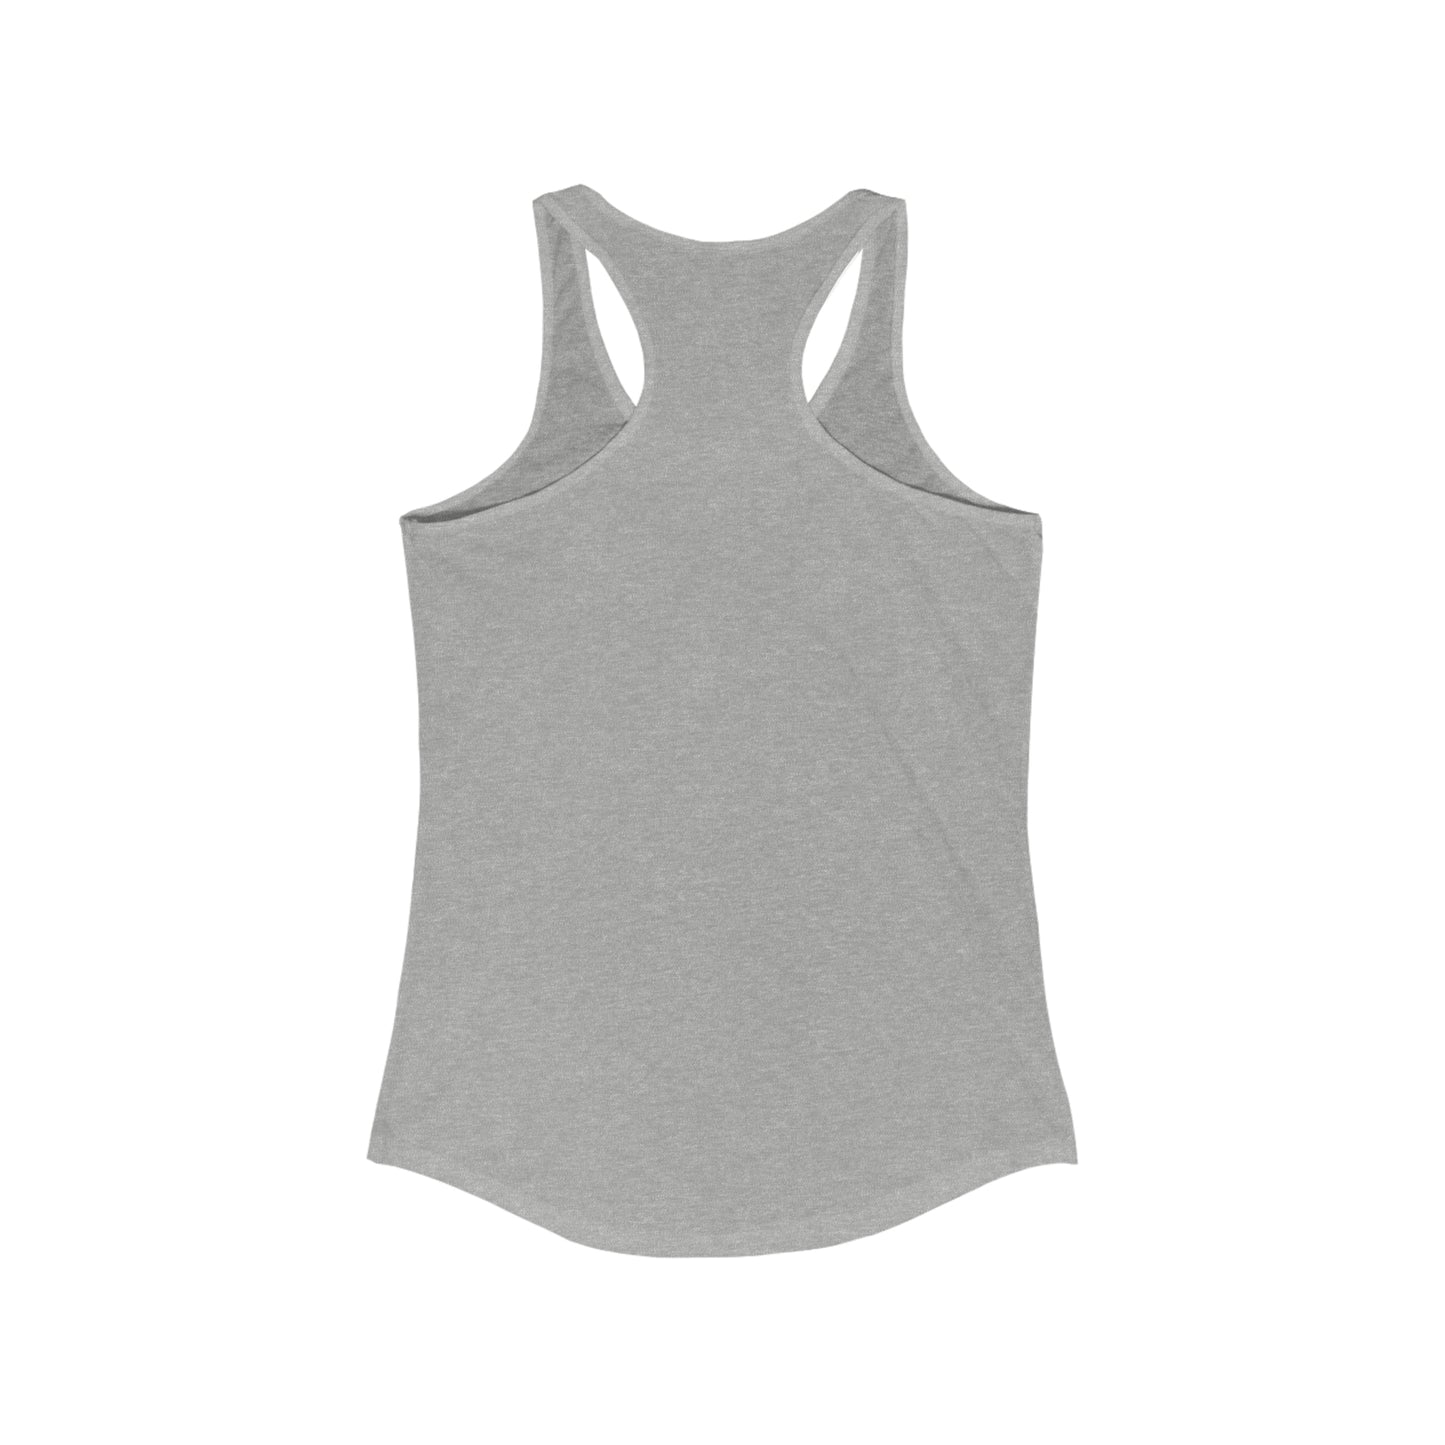 Chic Racerback Tank Top with High-Quality Print: Lightweight, Comfy, and Stylish | Ideal for Active Lifestyles